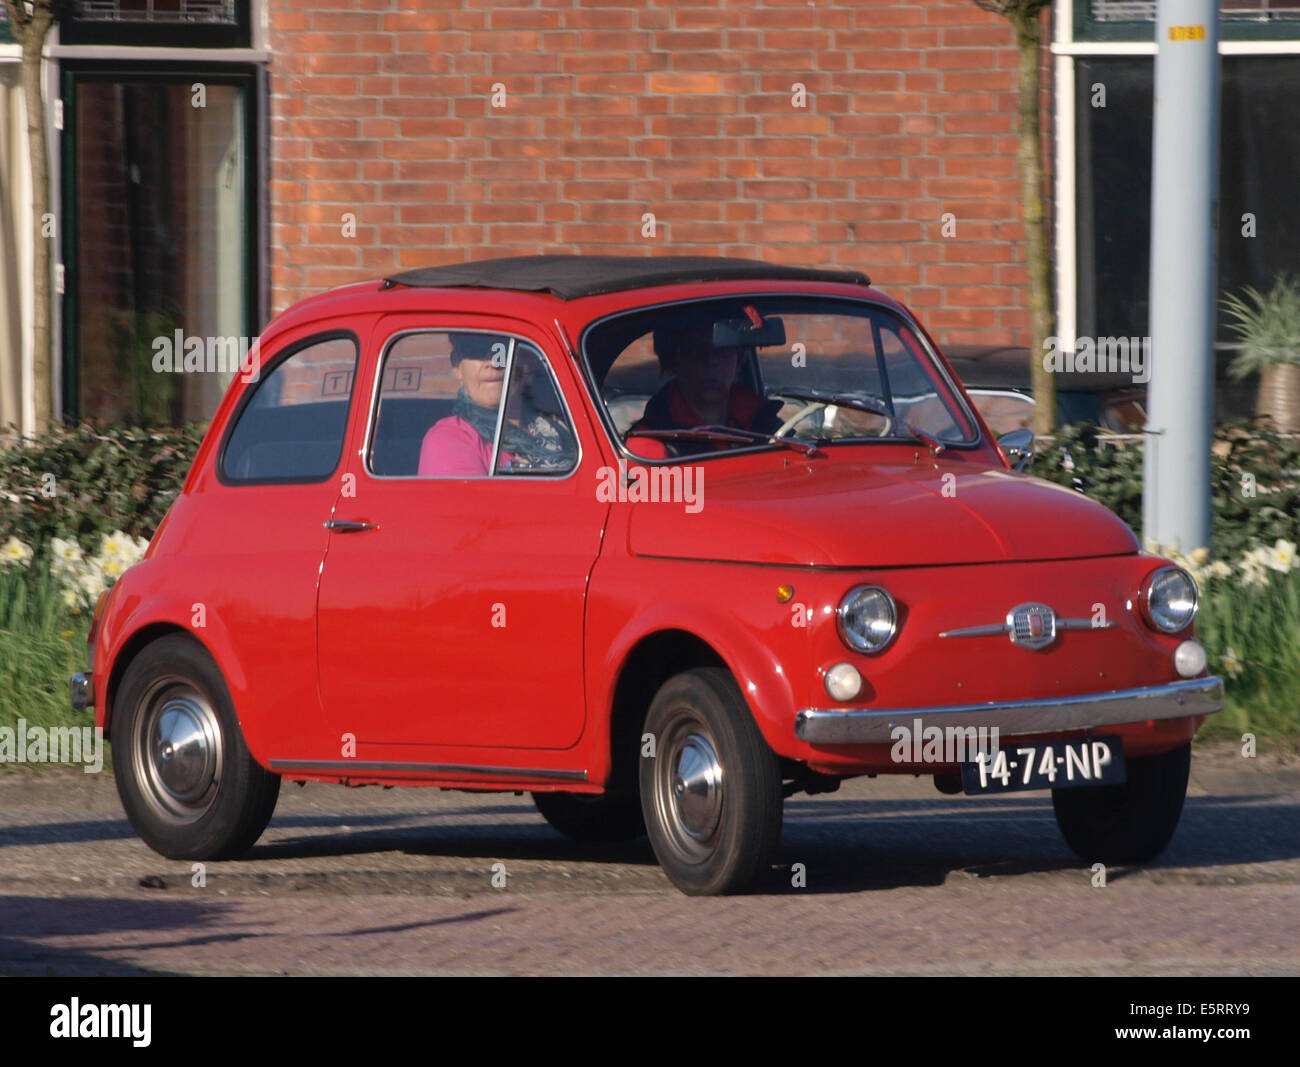 1970 Fiat , Dutch licence registration 14-74-NP, pic2 Stock Photo